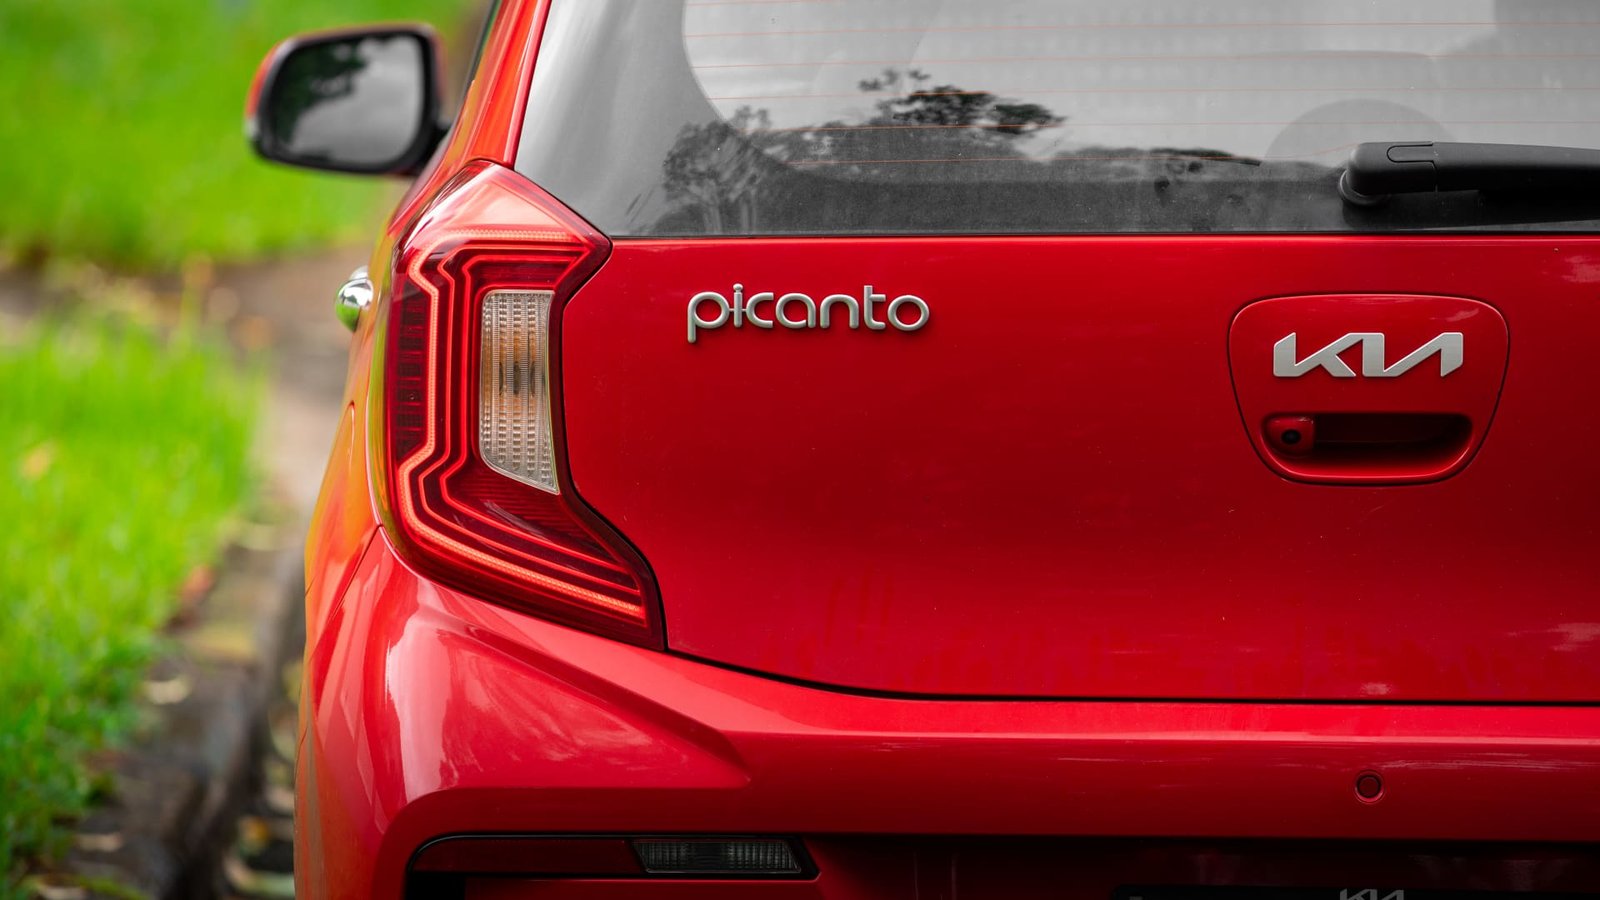 VFACTS: Kia Picanto breaks sales record, demand at all-time high